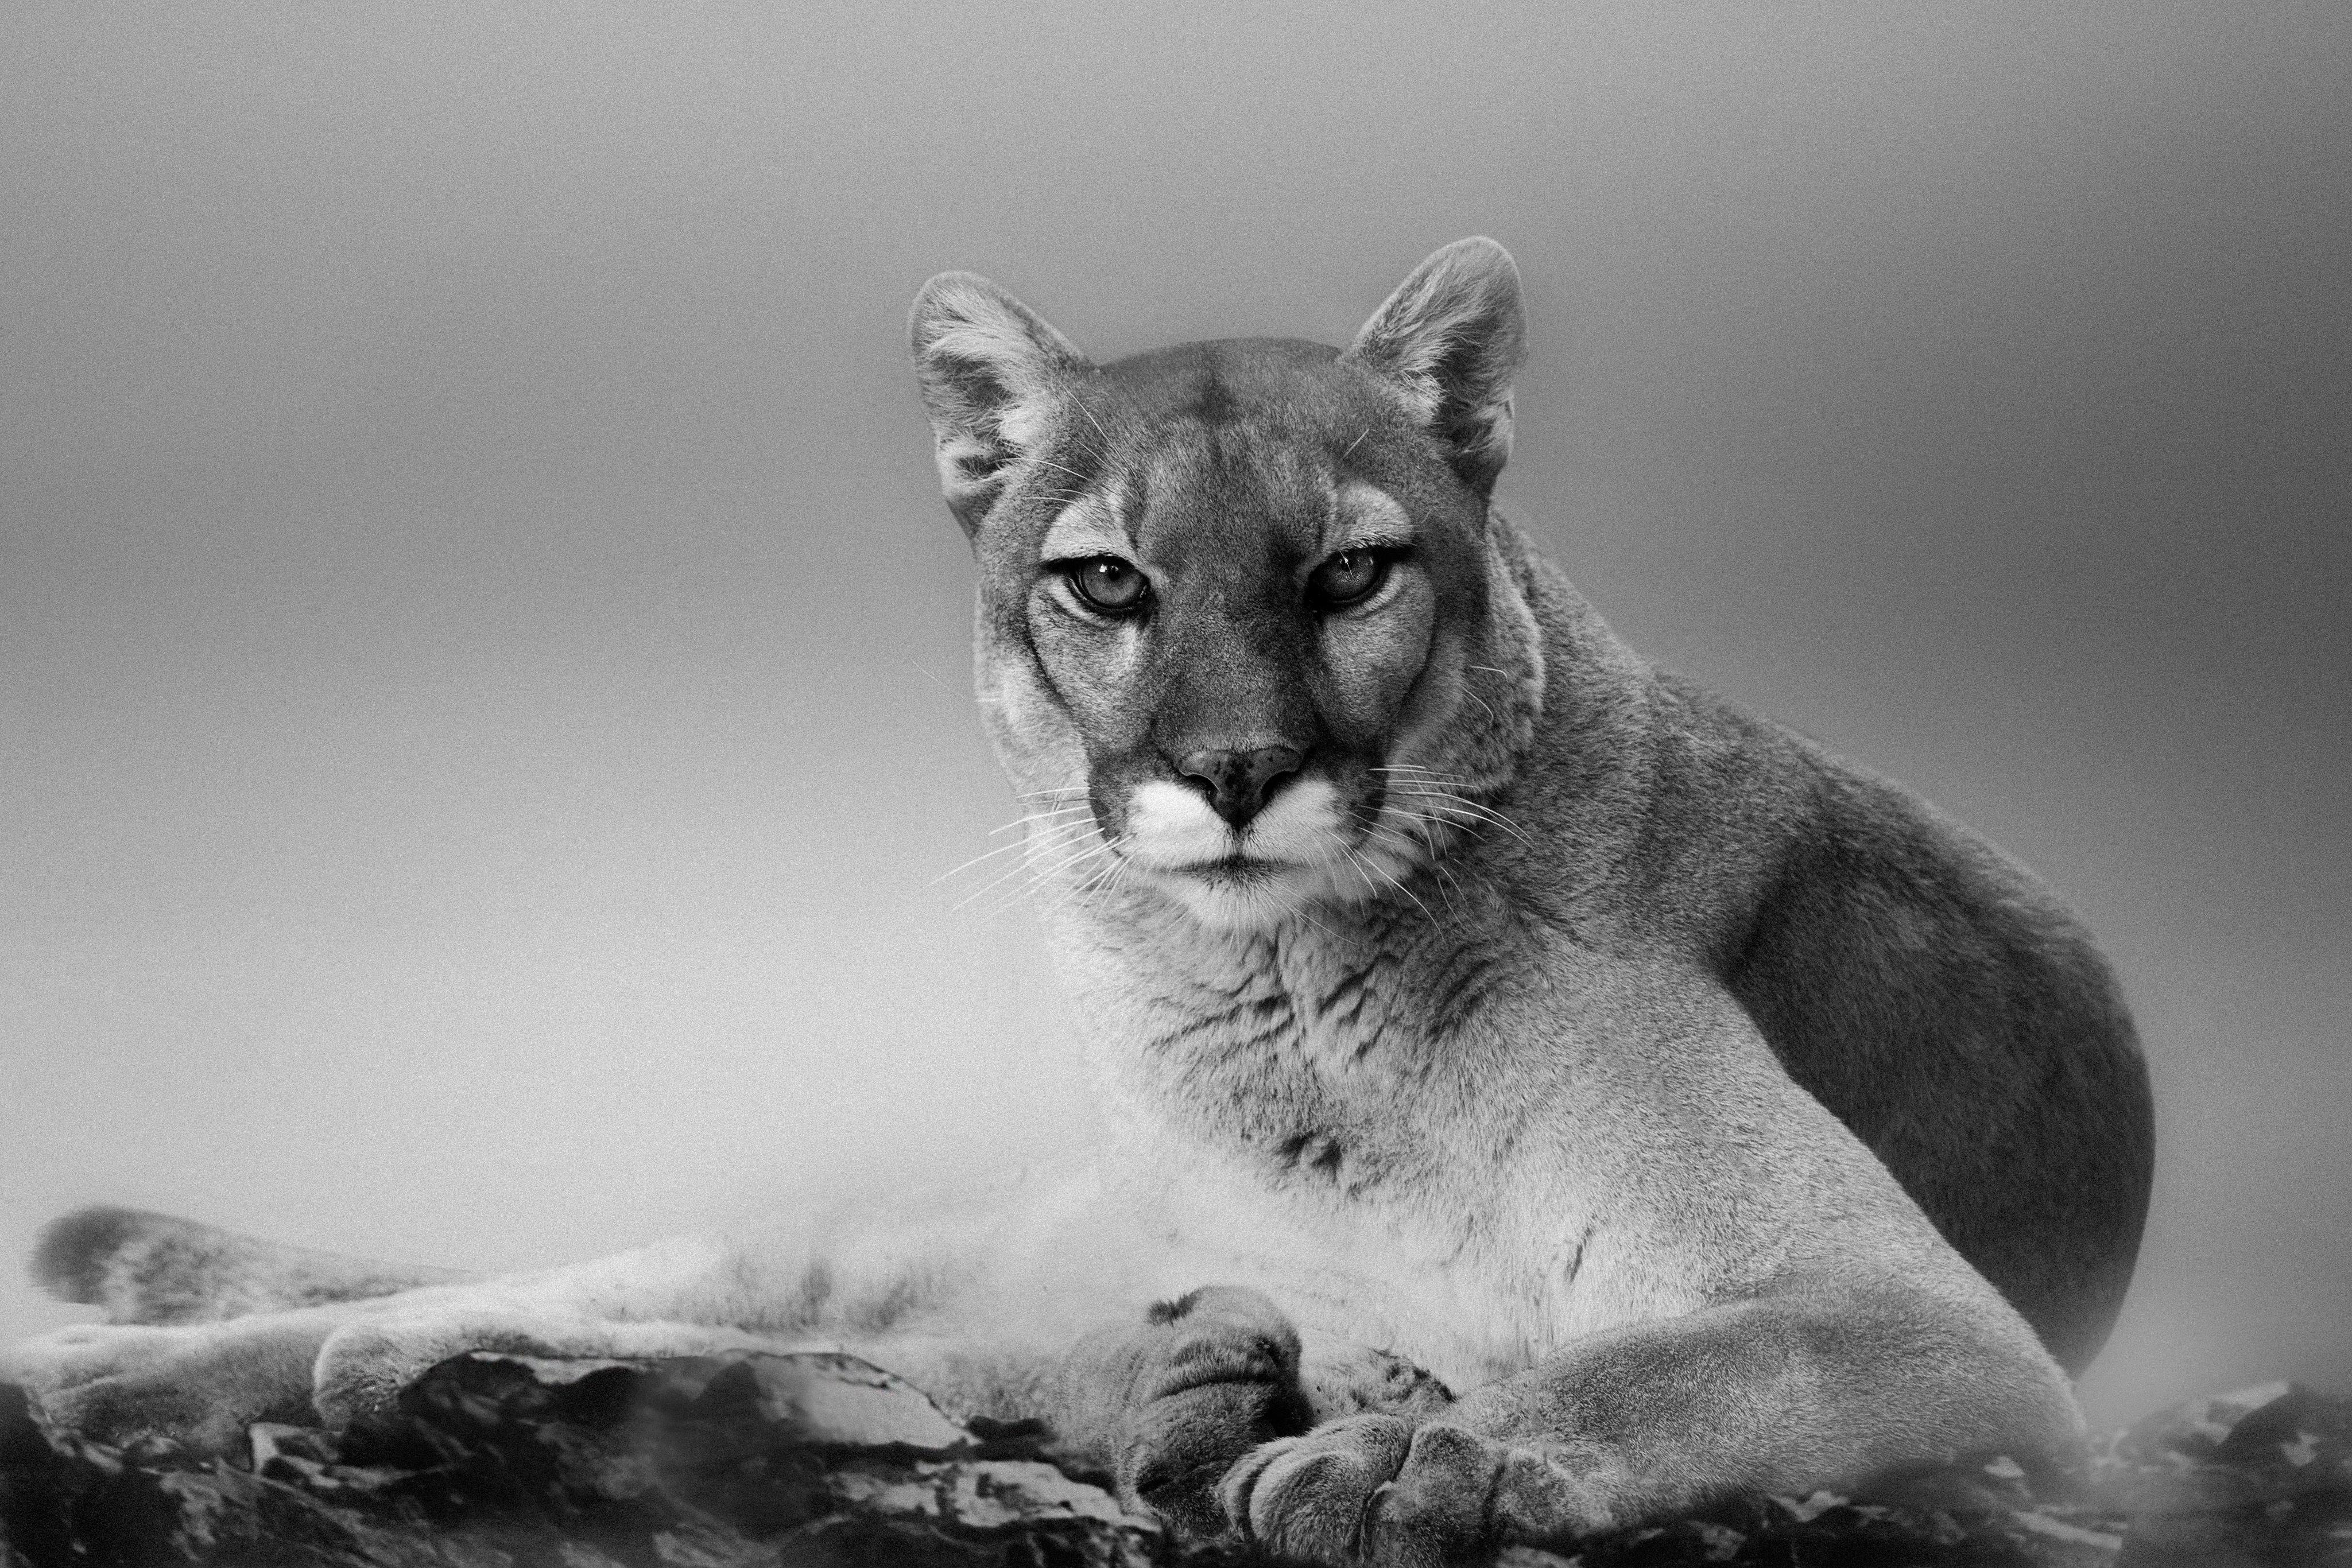 Shane Russeck Black and White Photograph - Cougar Print 24x36 - Fine Art Photography of Mountain Lion, Cougar Western Art